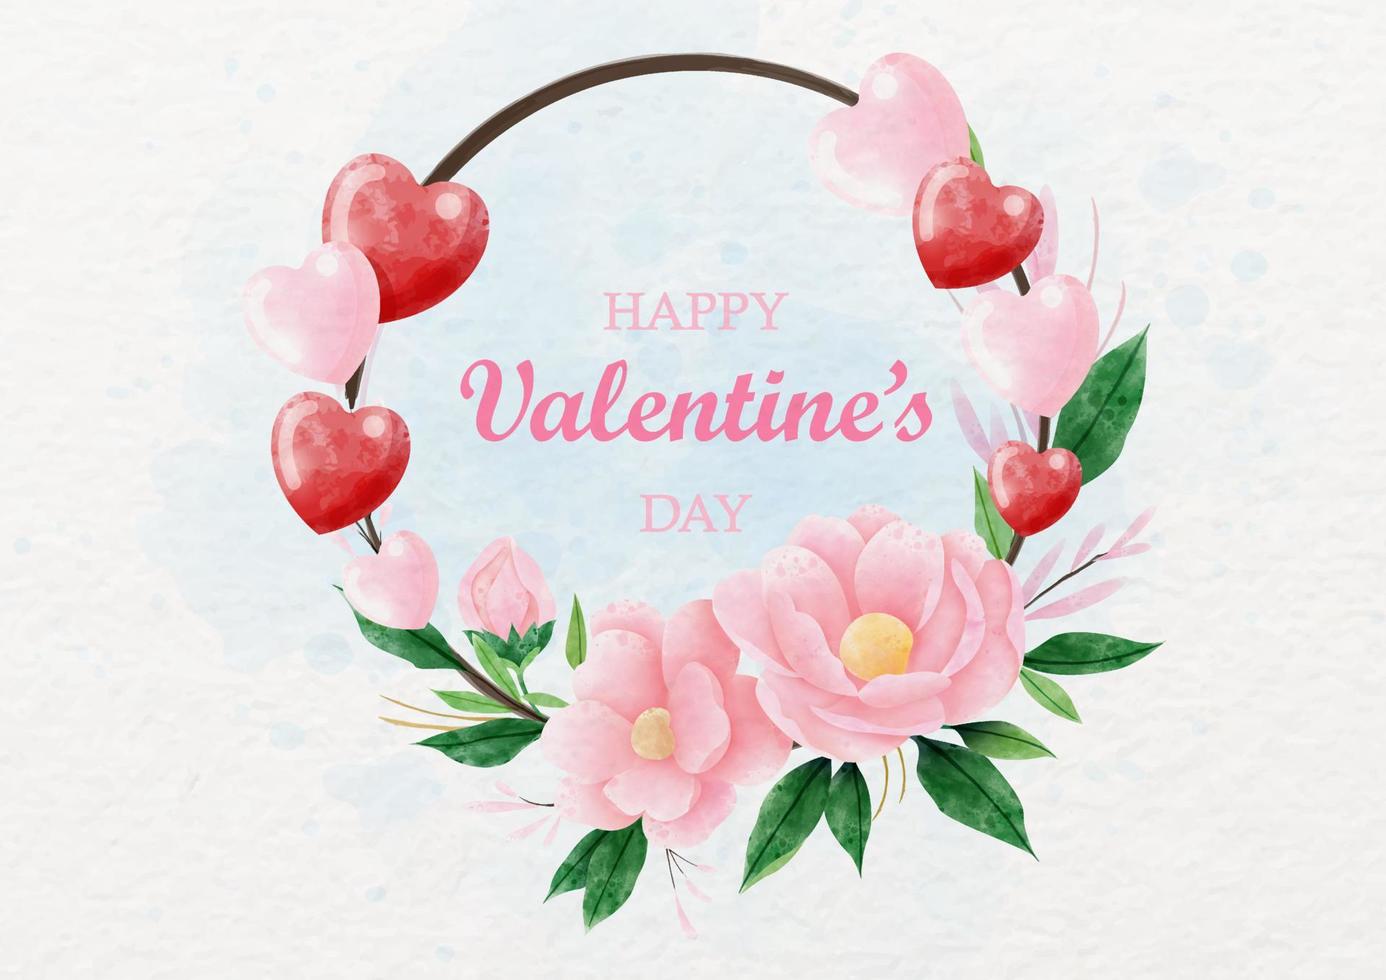 Pink rose Valentine holly and decorated wreath in watercolors style with Valentine's wording on white paper pattern background. Valentine's day greeting card in vector and watercolors style